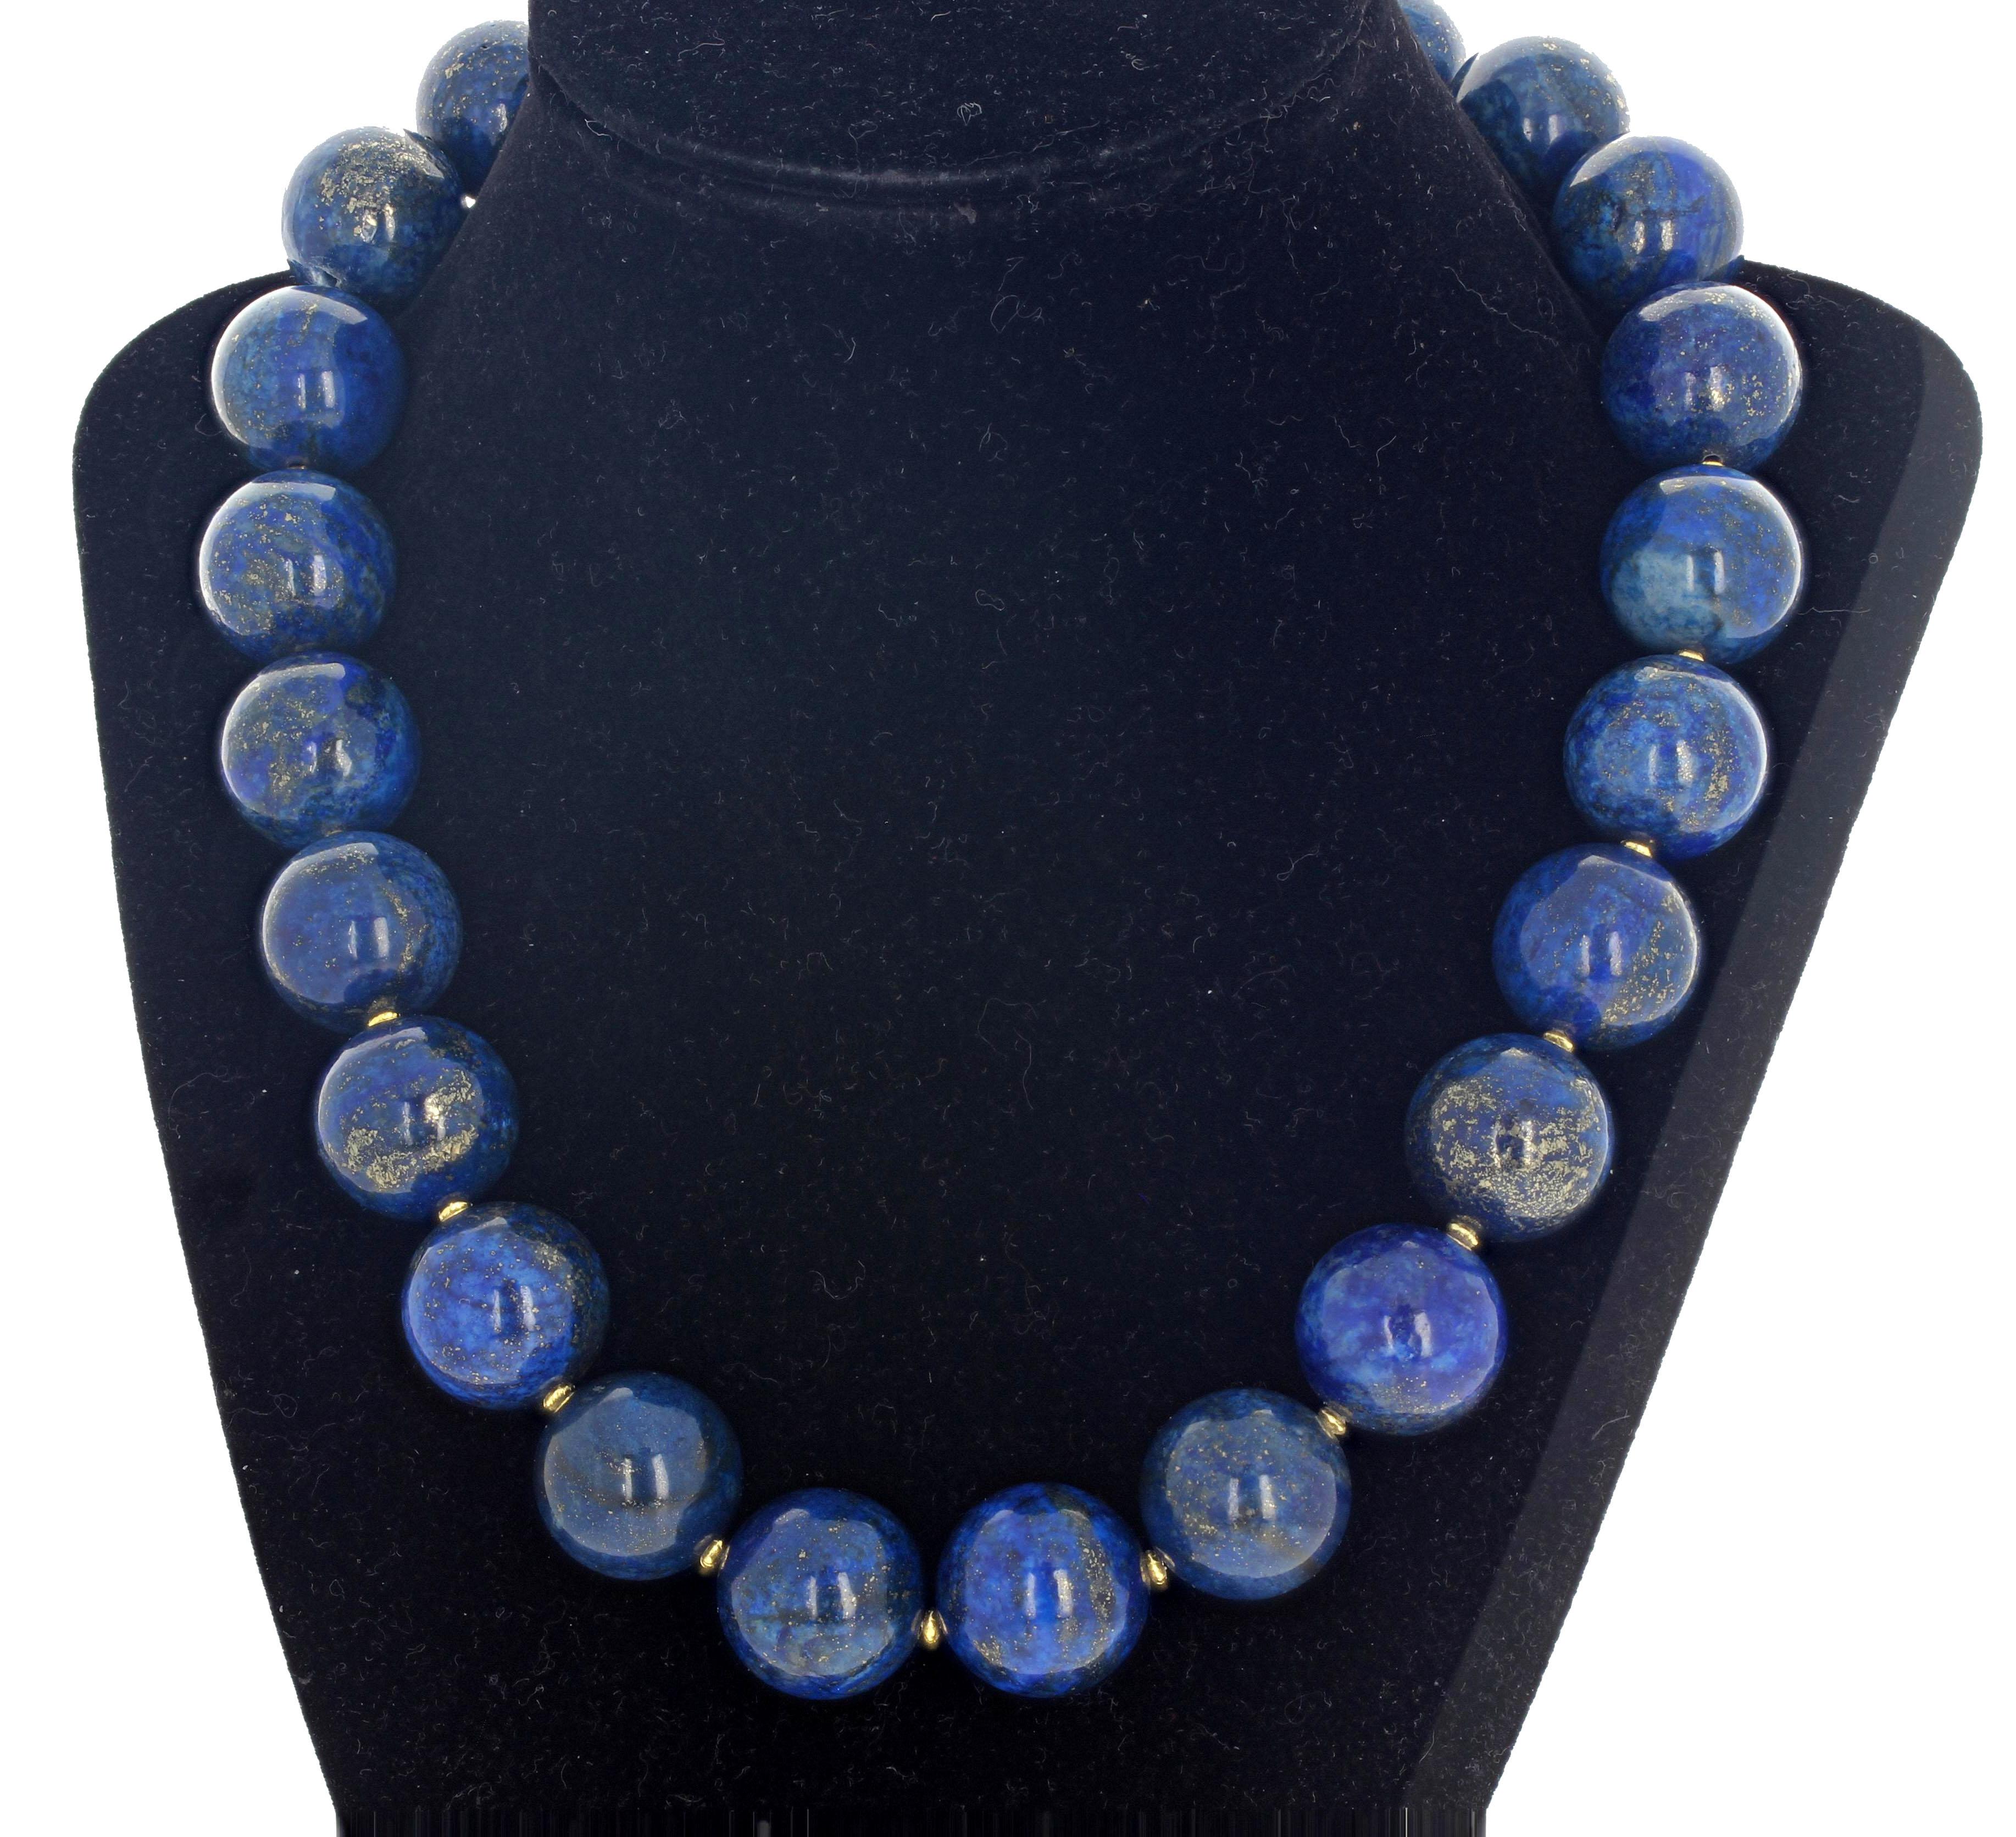 These lovely natural glowing Lapis Lazuli are 18mm round and are enhanced with tiny gold plated rondels set in this 18.5 inch long necklace.  These beautiful gemstones show off the goldy flecks of the natural gemstone quite beautifully. 